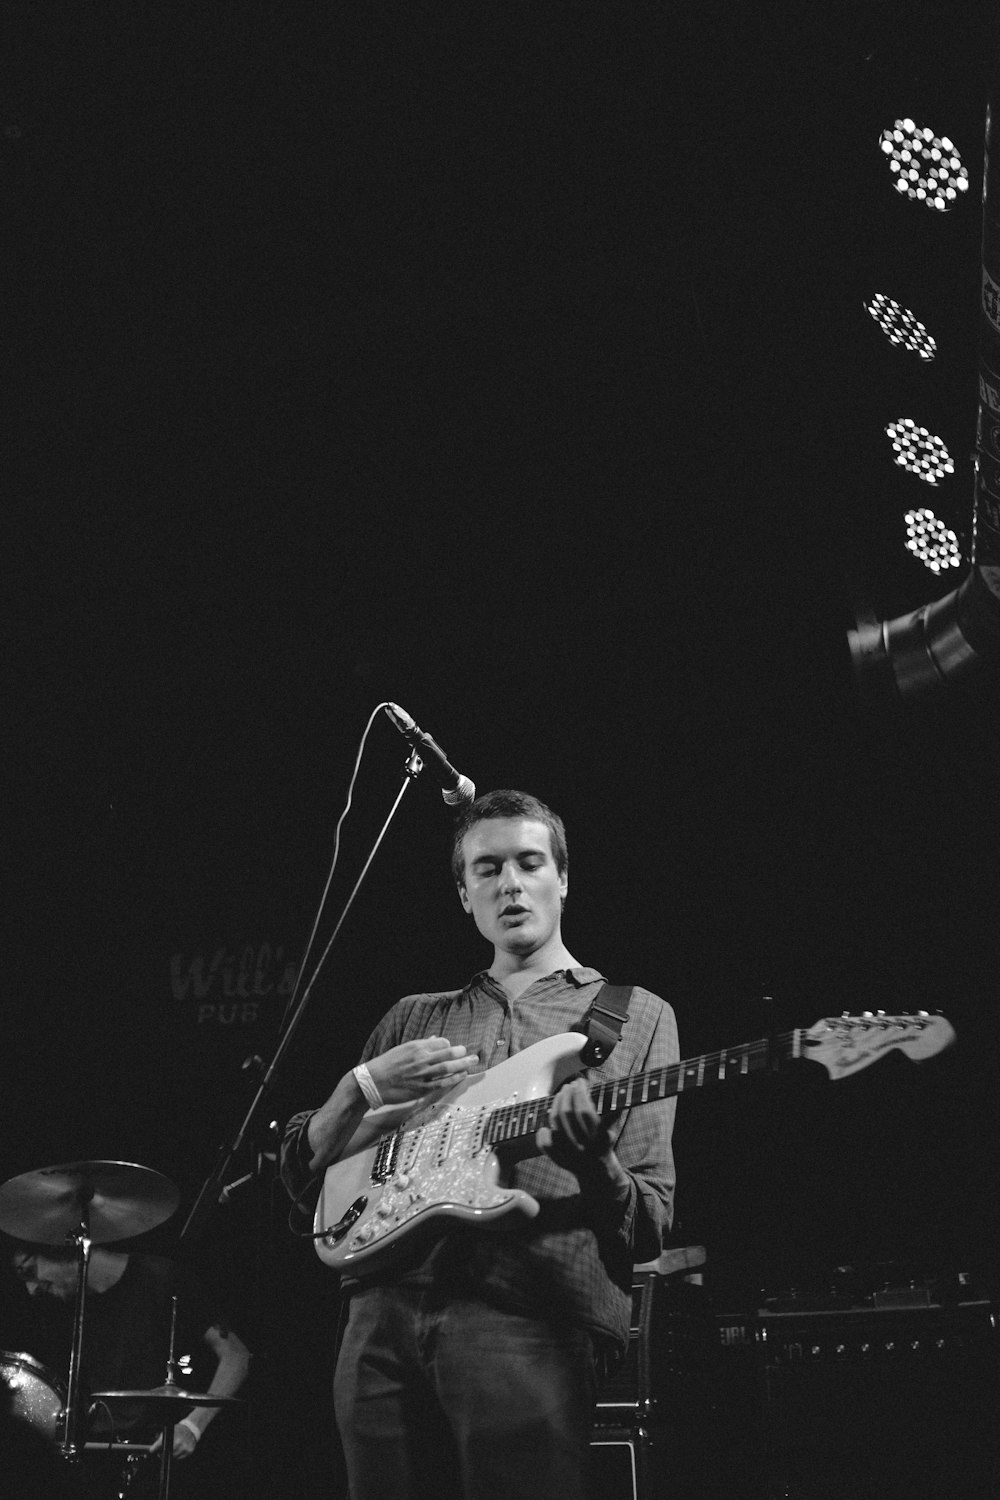 grayscale photography of man playing guitar on stage